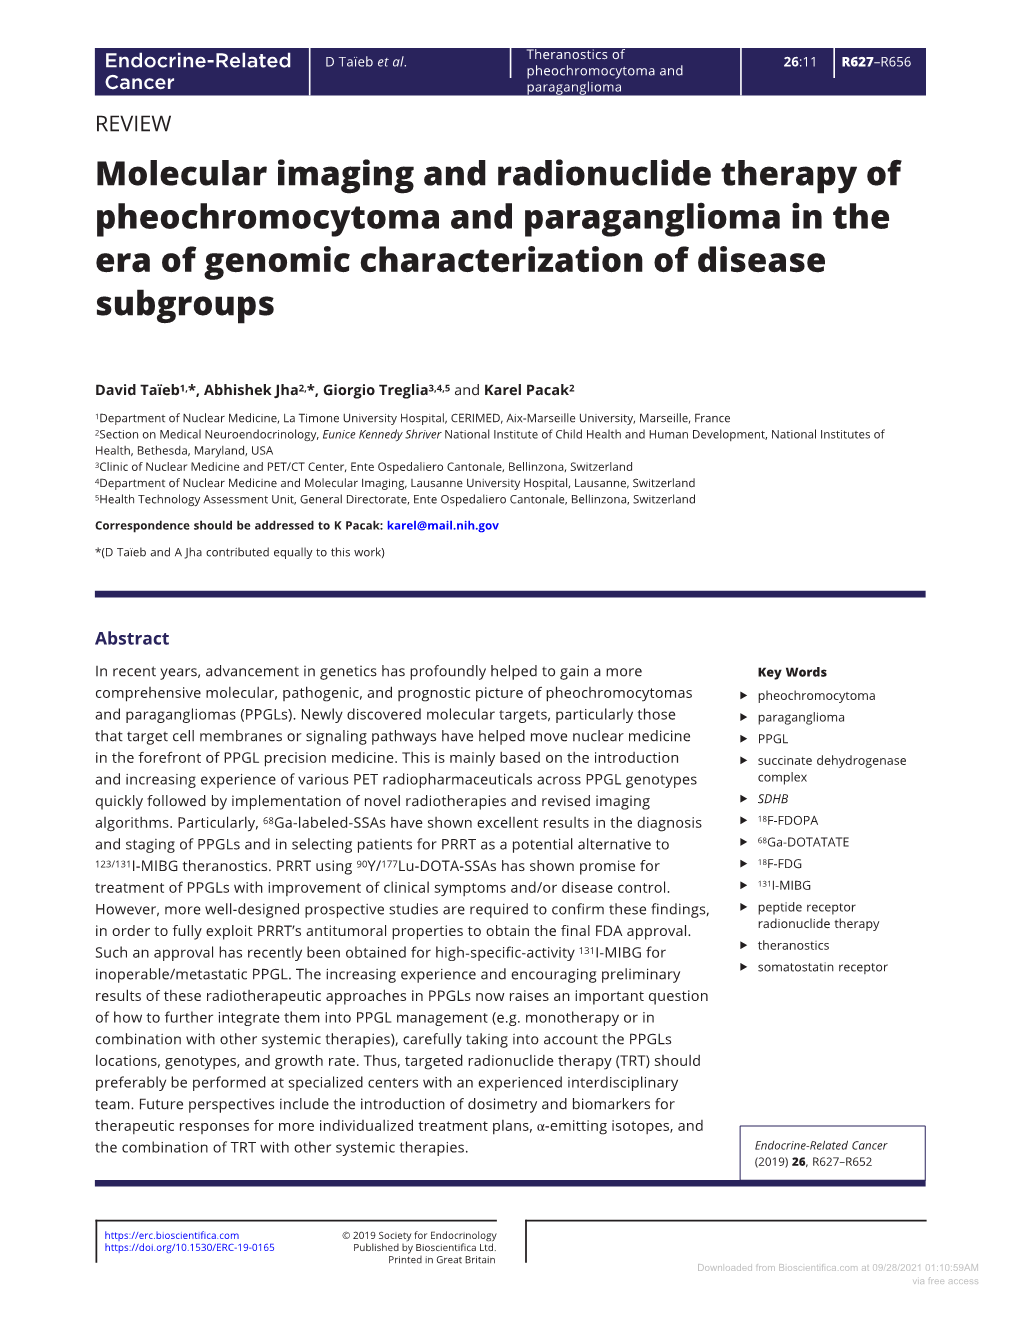 Molecular Imaging and Radionuclide Therapy of Pheochromocytoma and Paraganglioma in the Era of Genomic Characterization of Disease Subgroups